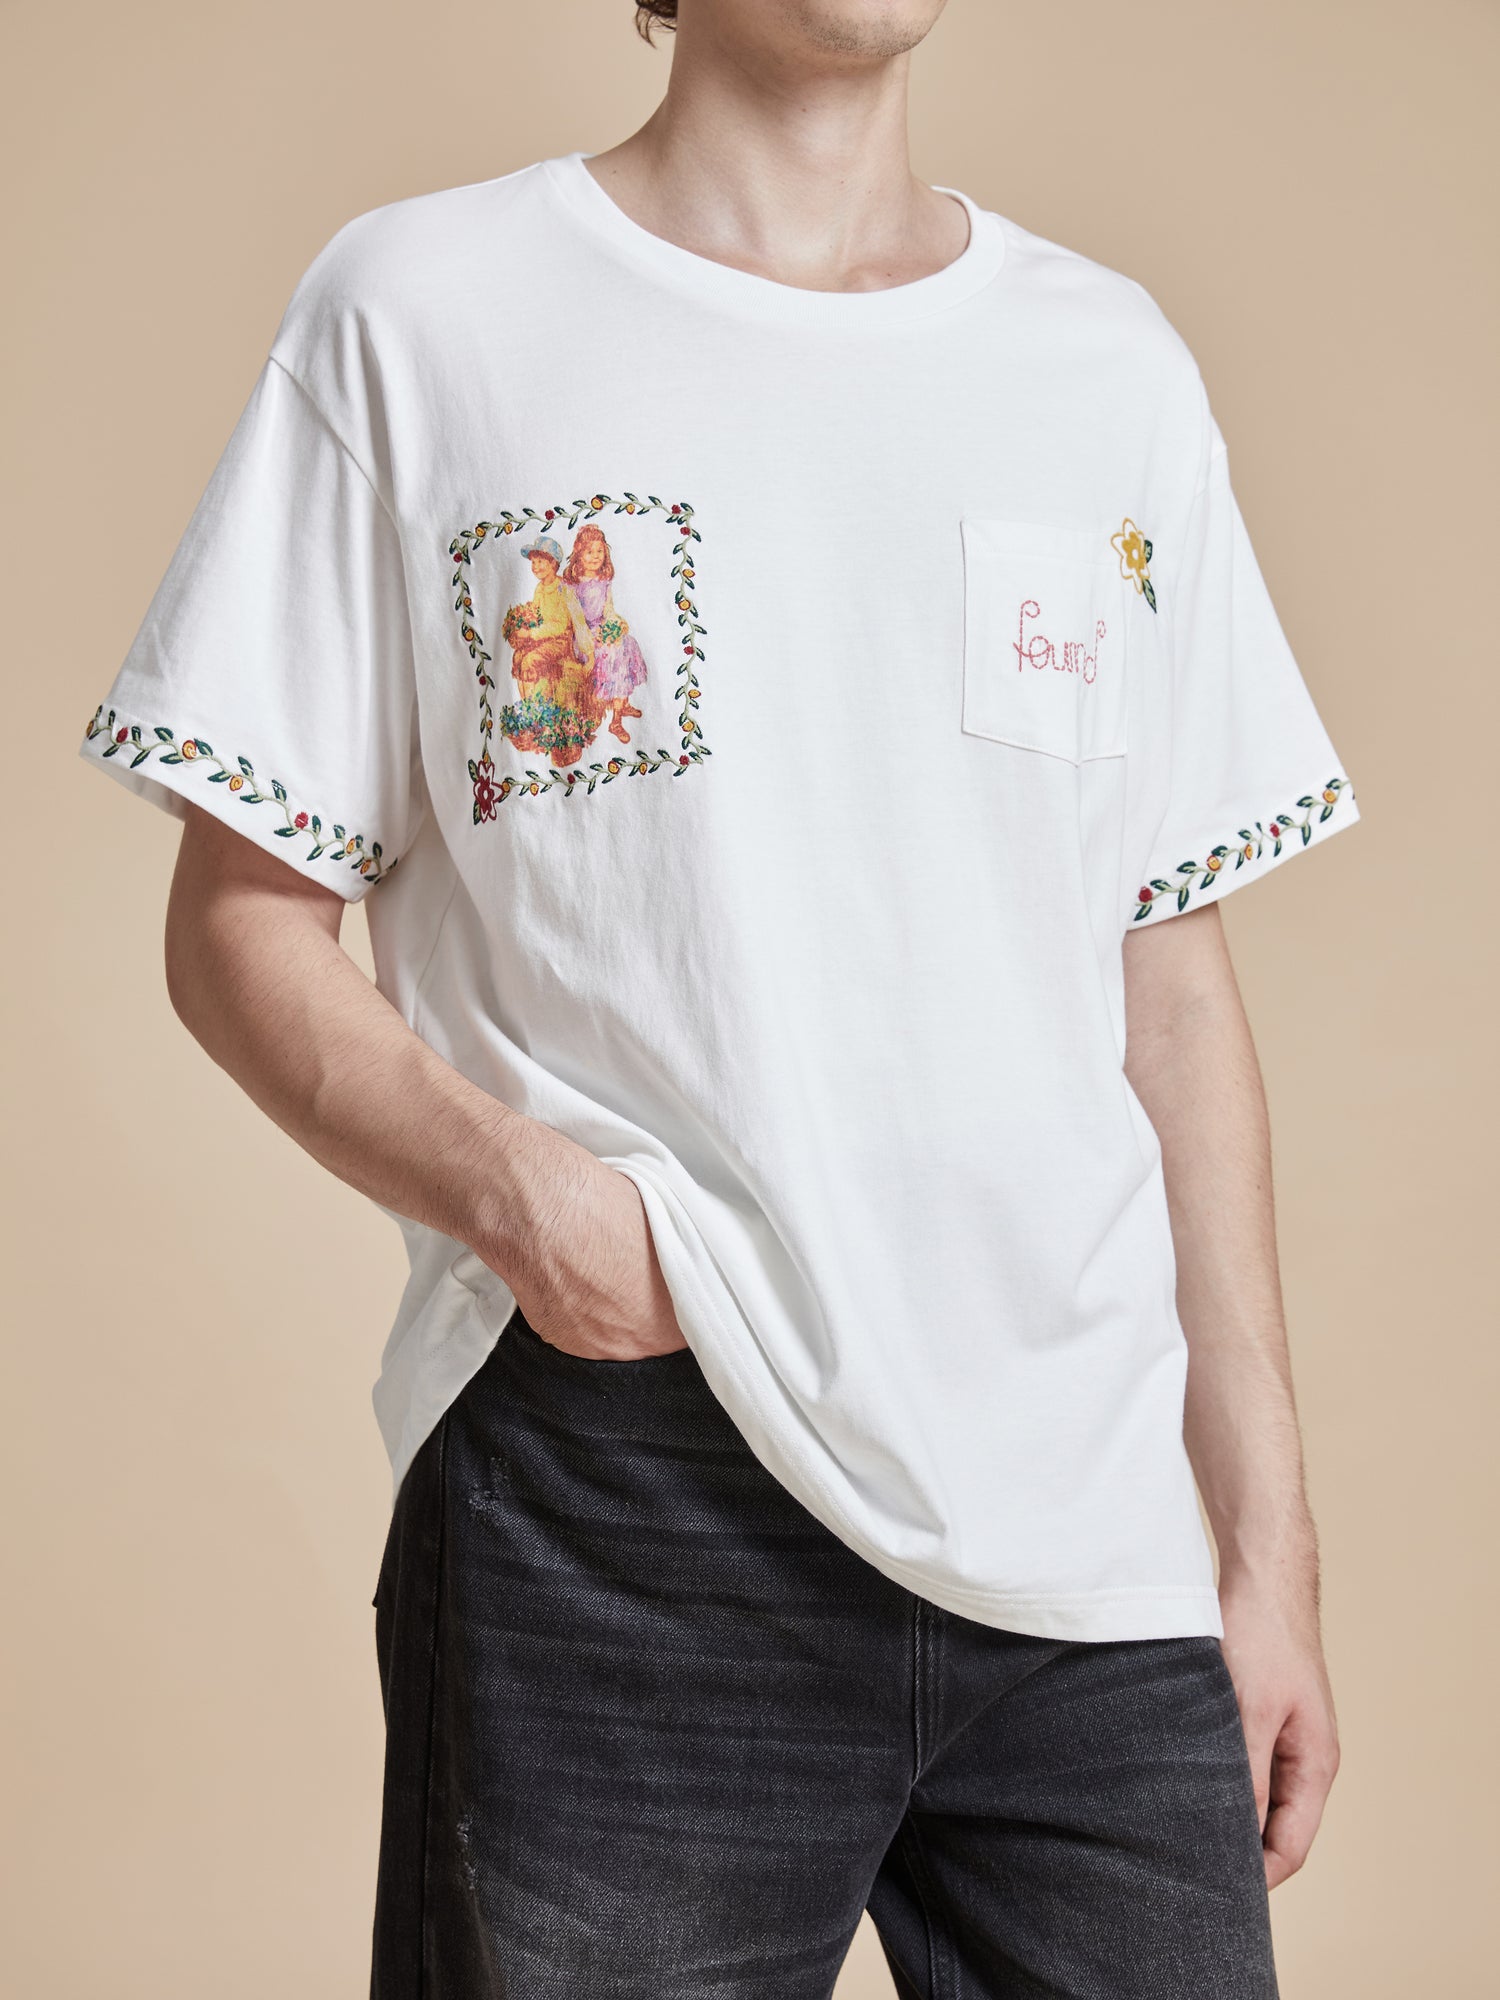 A man wearing a Found Flower Children Tee with floral Phulkari style embroideries, inspired by classic American folk art.